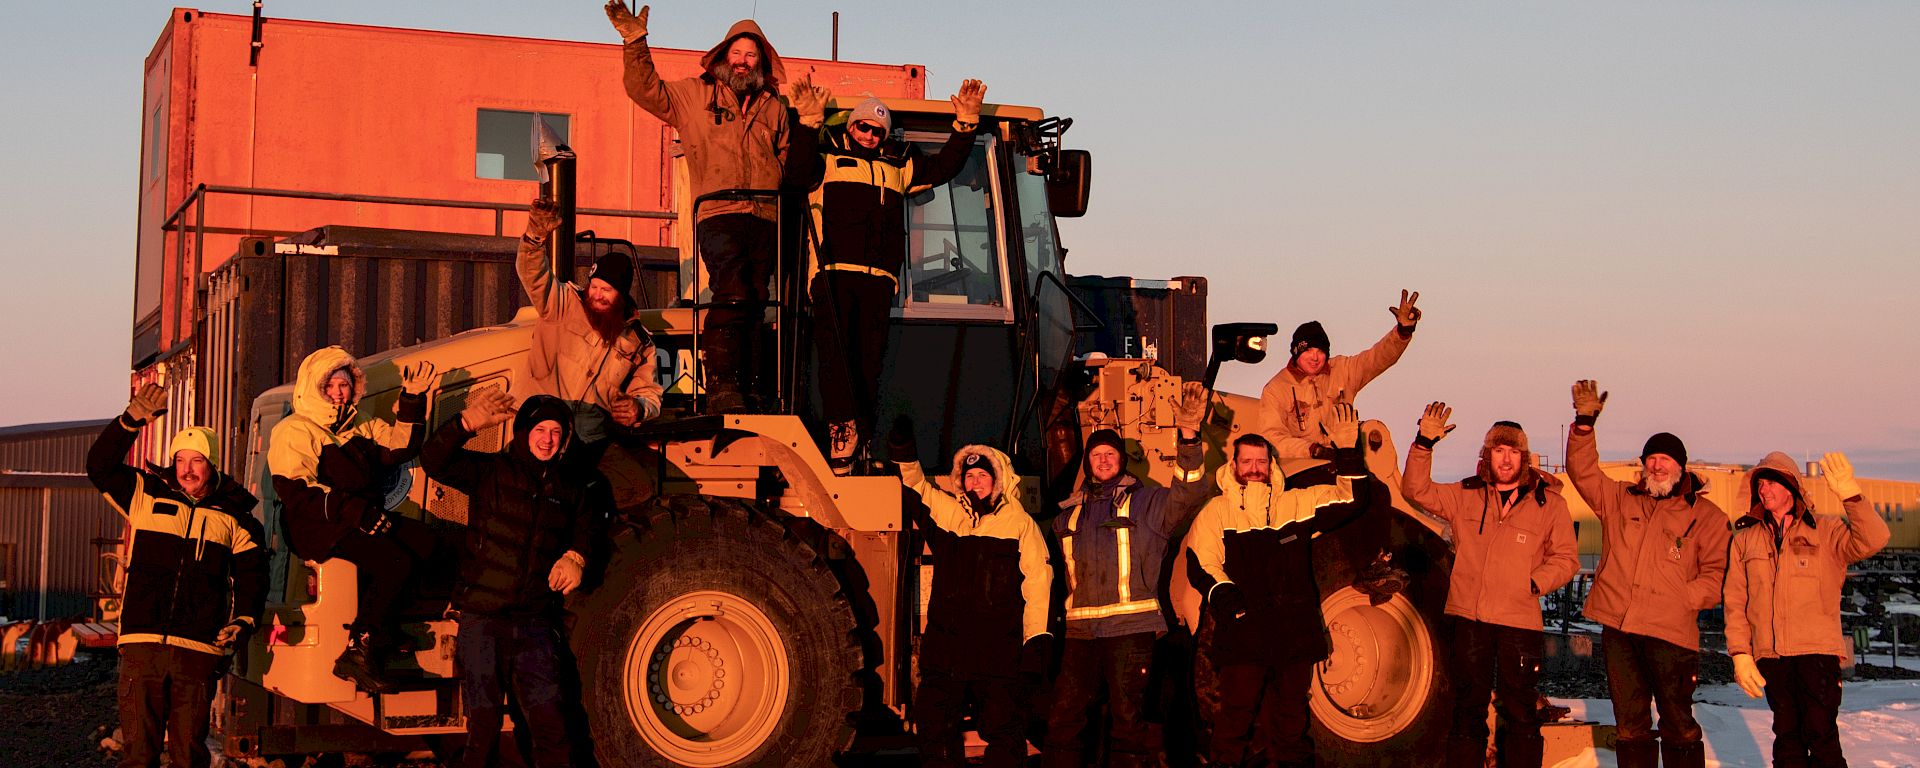 Group of expeditioners standing on and near a large loader truck, waving at the camera at sunset.